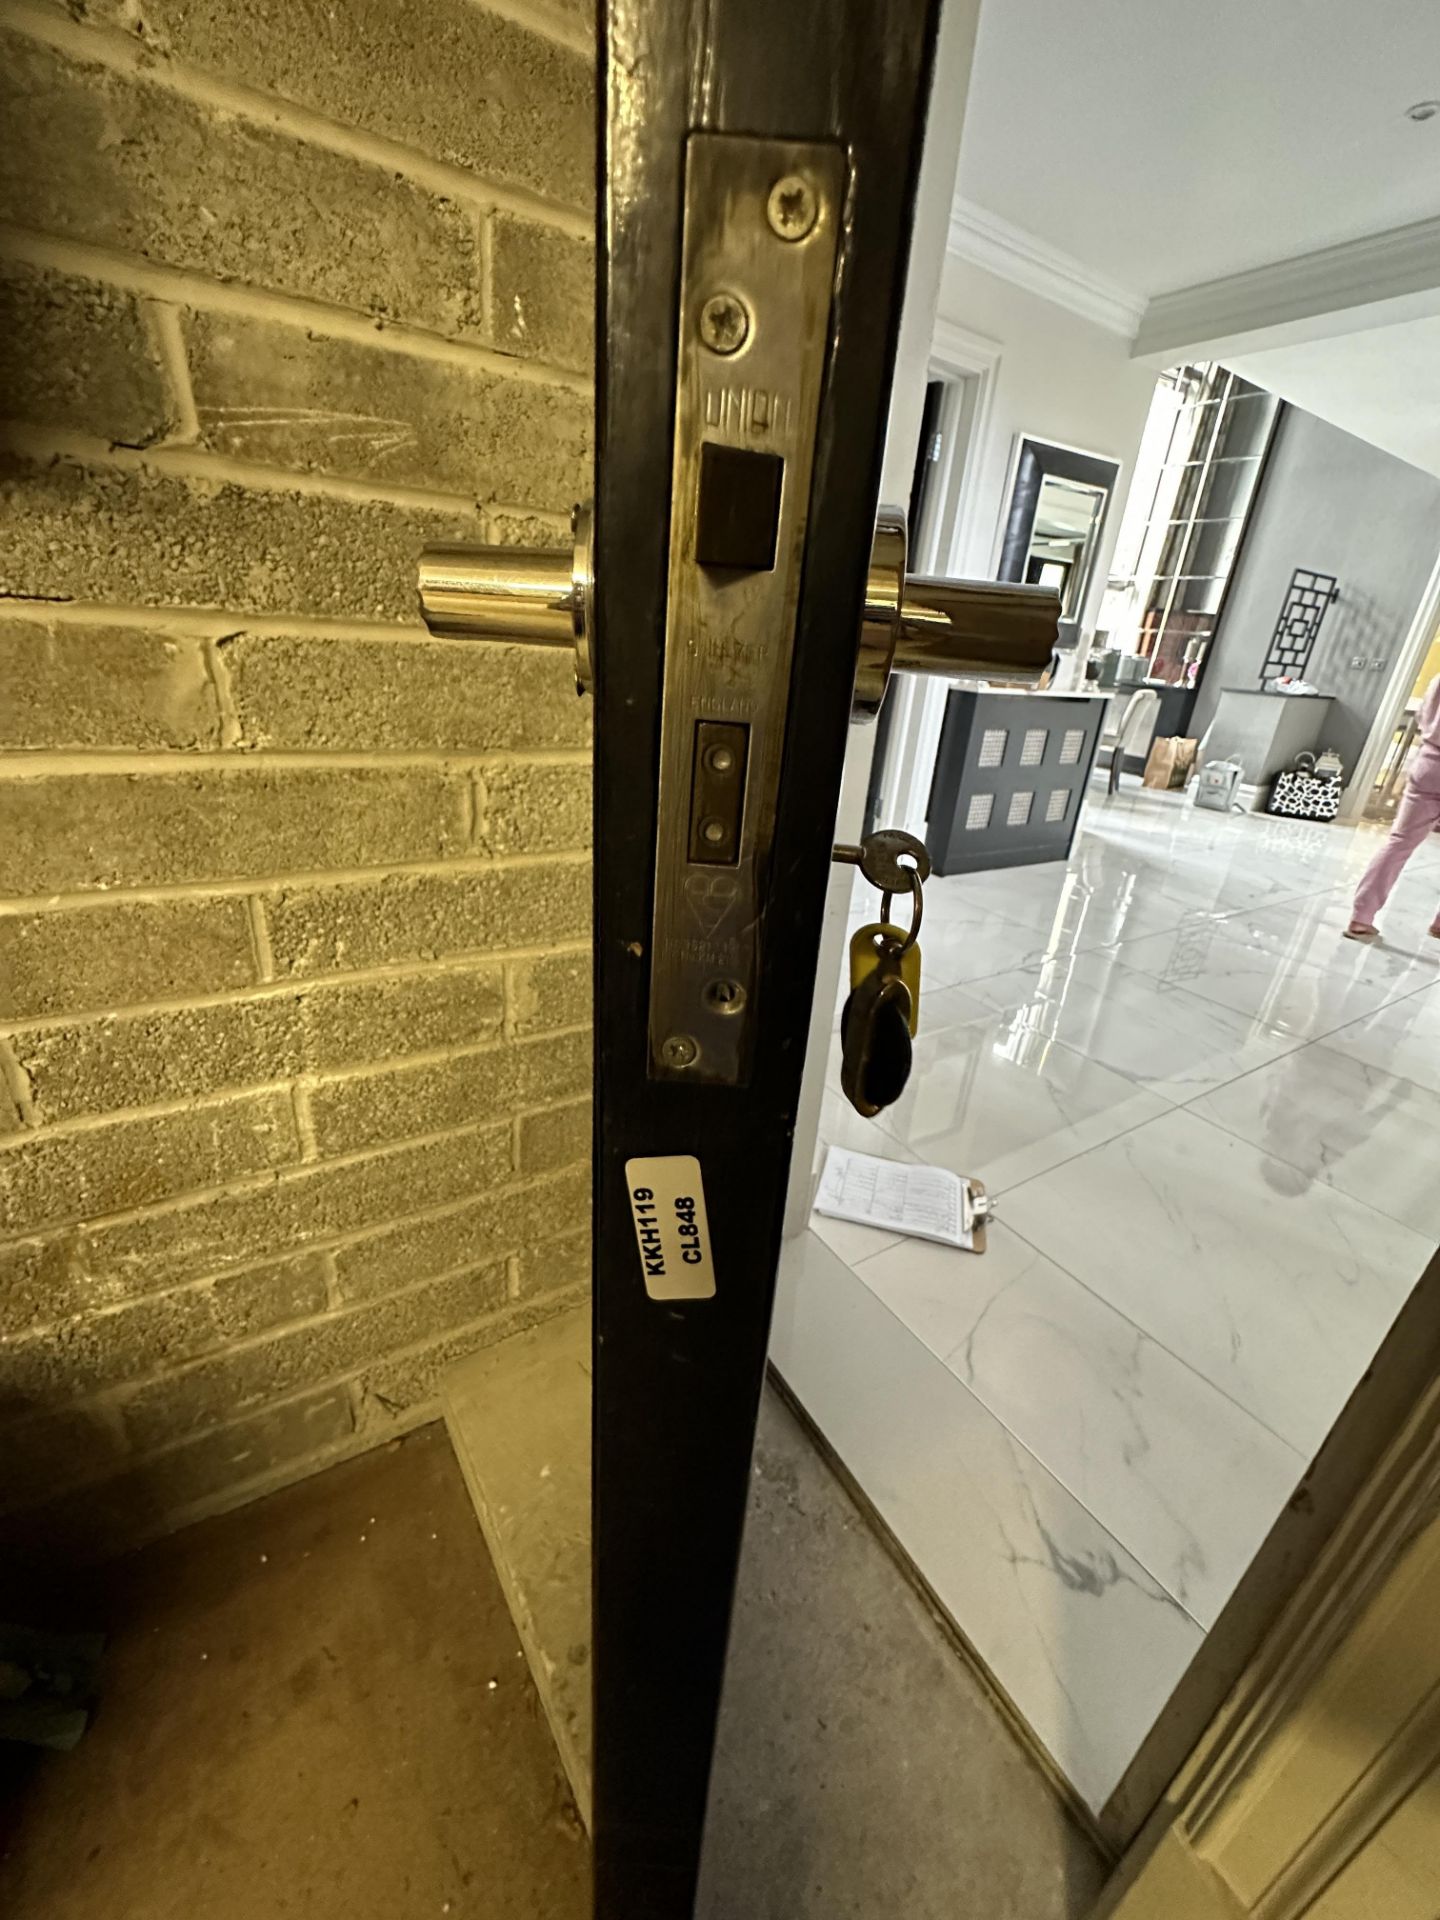 1 x SOLID OAK Black Gloss Fire Door And Stainless Steel Hardware - Ref: KKH114 - CL848 - NO VAT ON - Image 4 of 5